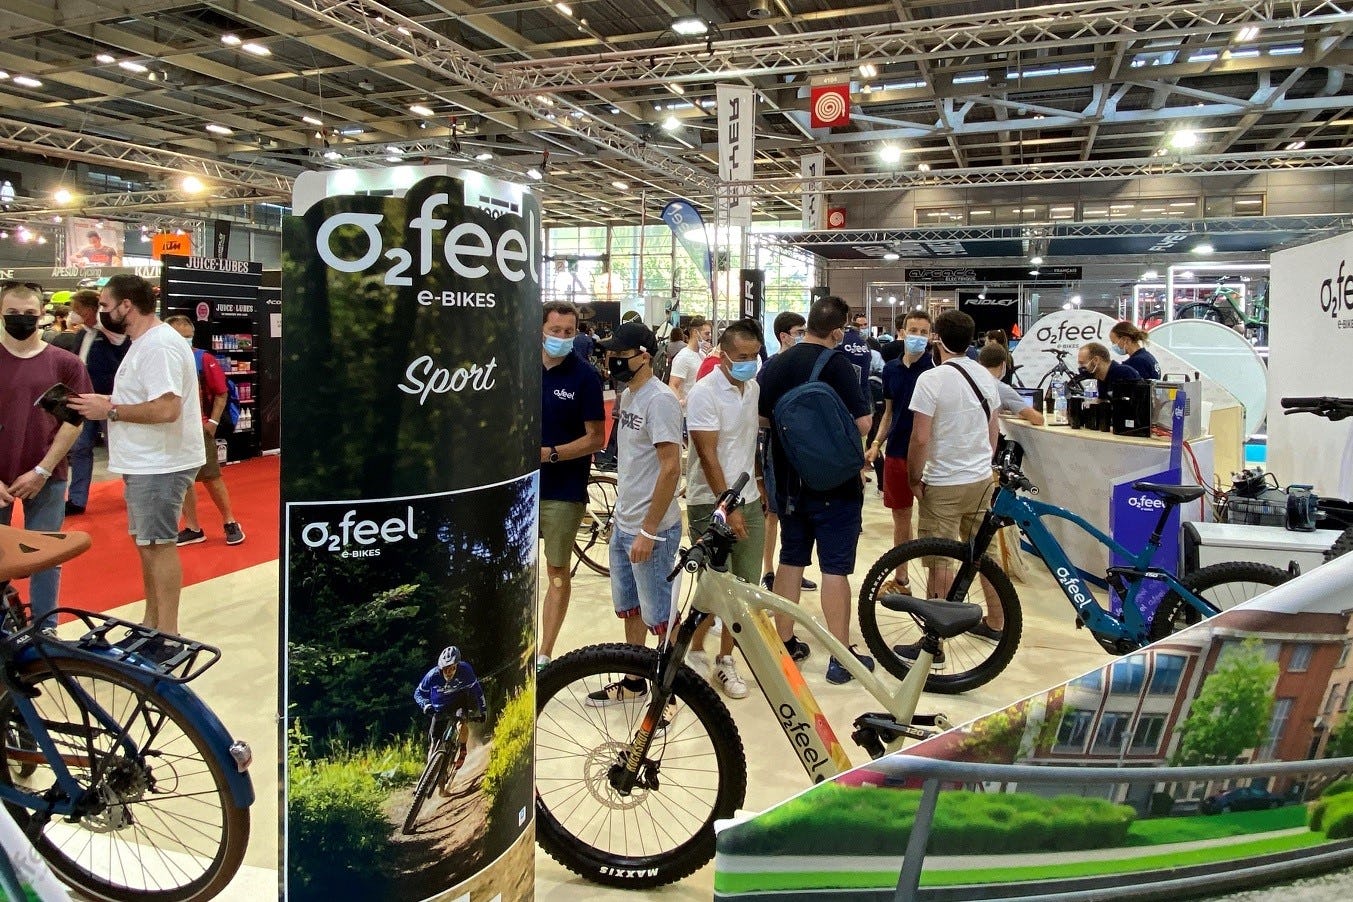 The Pro Days show gathered around 3,000 people who were mostly interested in e-bikes. Photo: Michel de Chavanon 